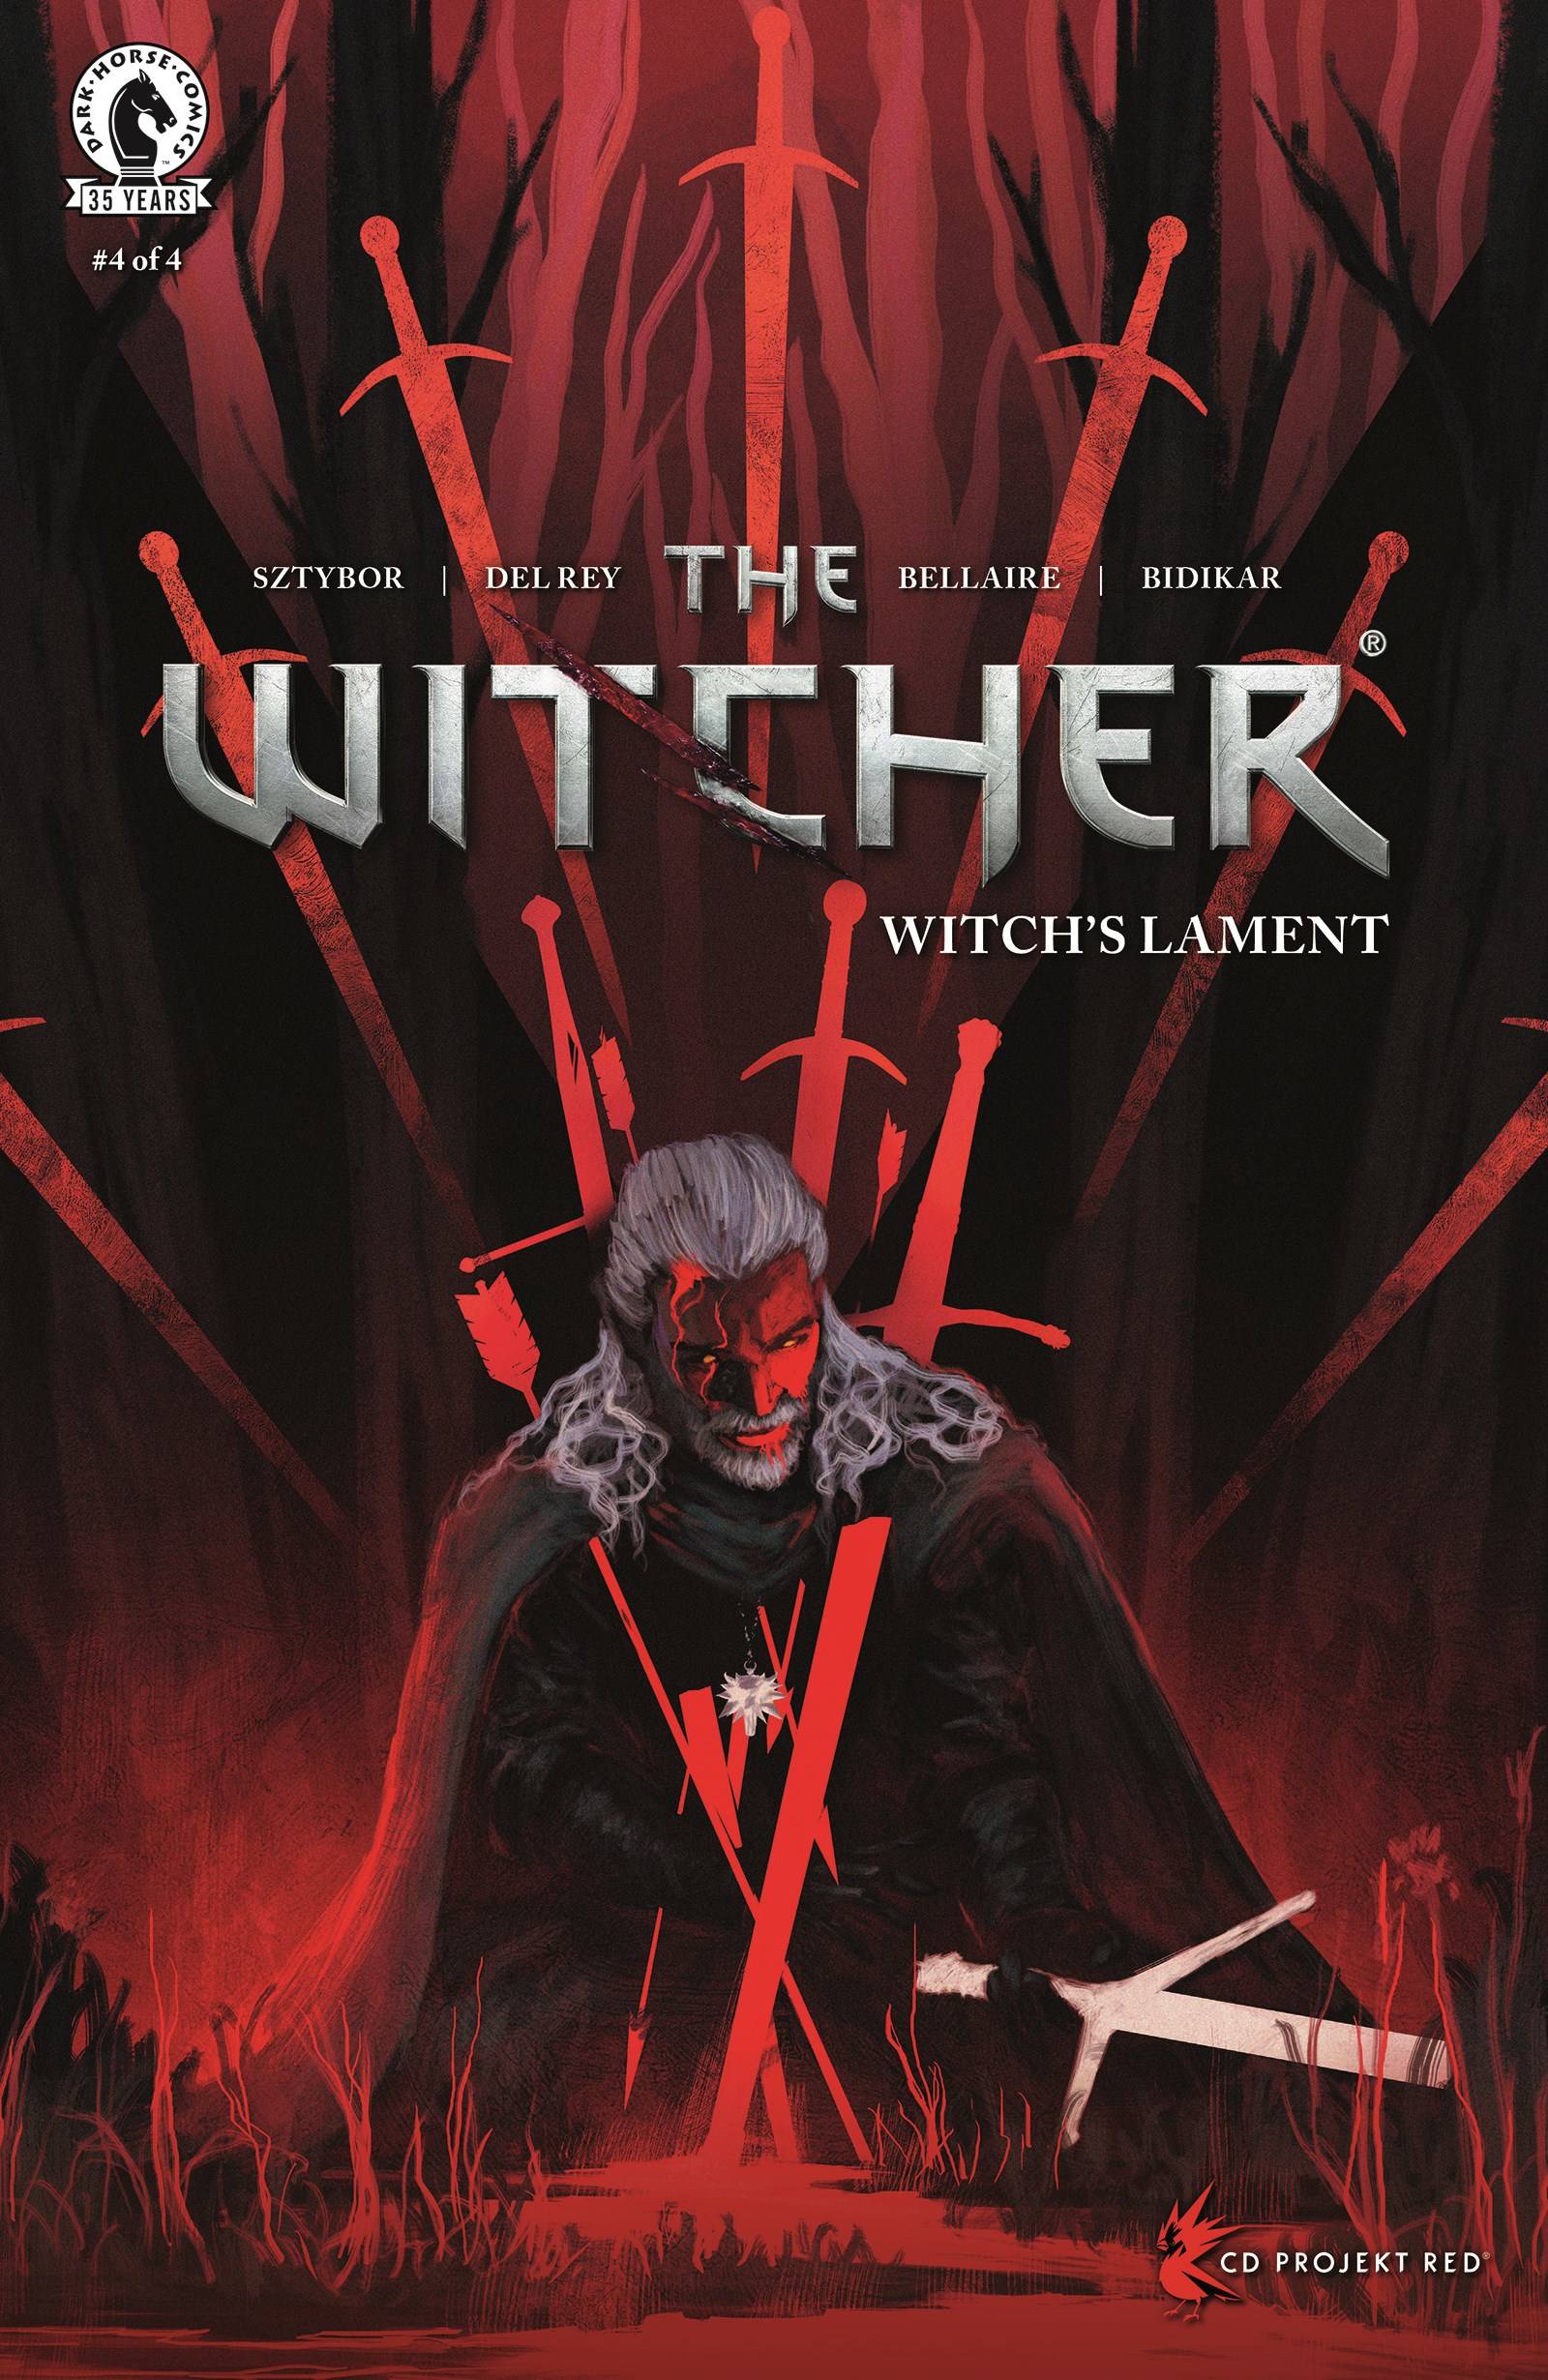 WITCHER WITCHS LAMENT